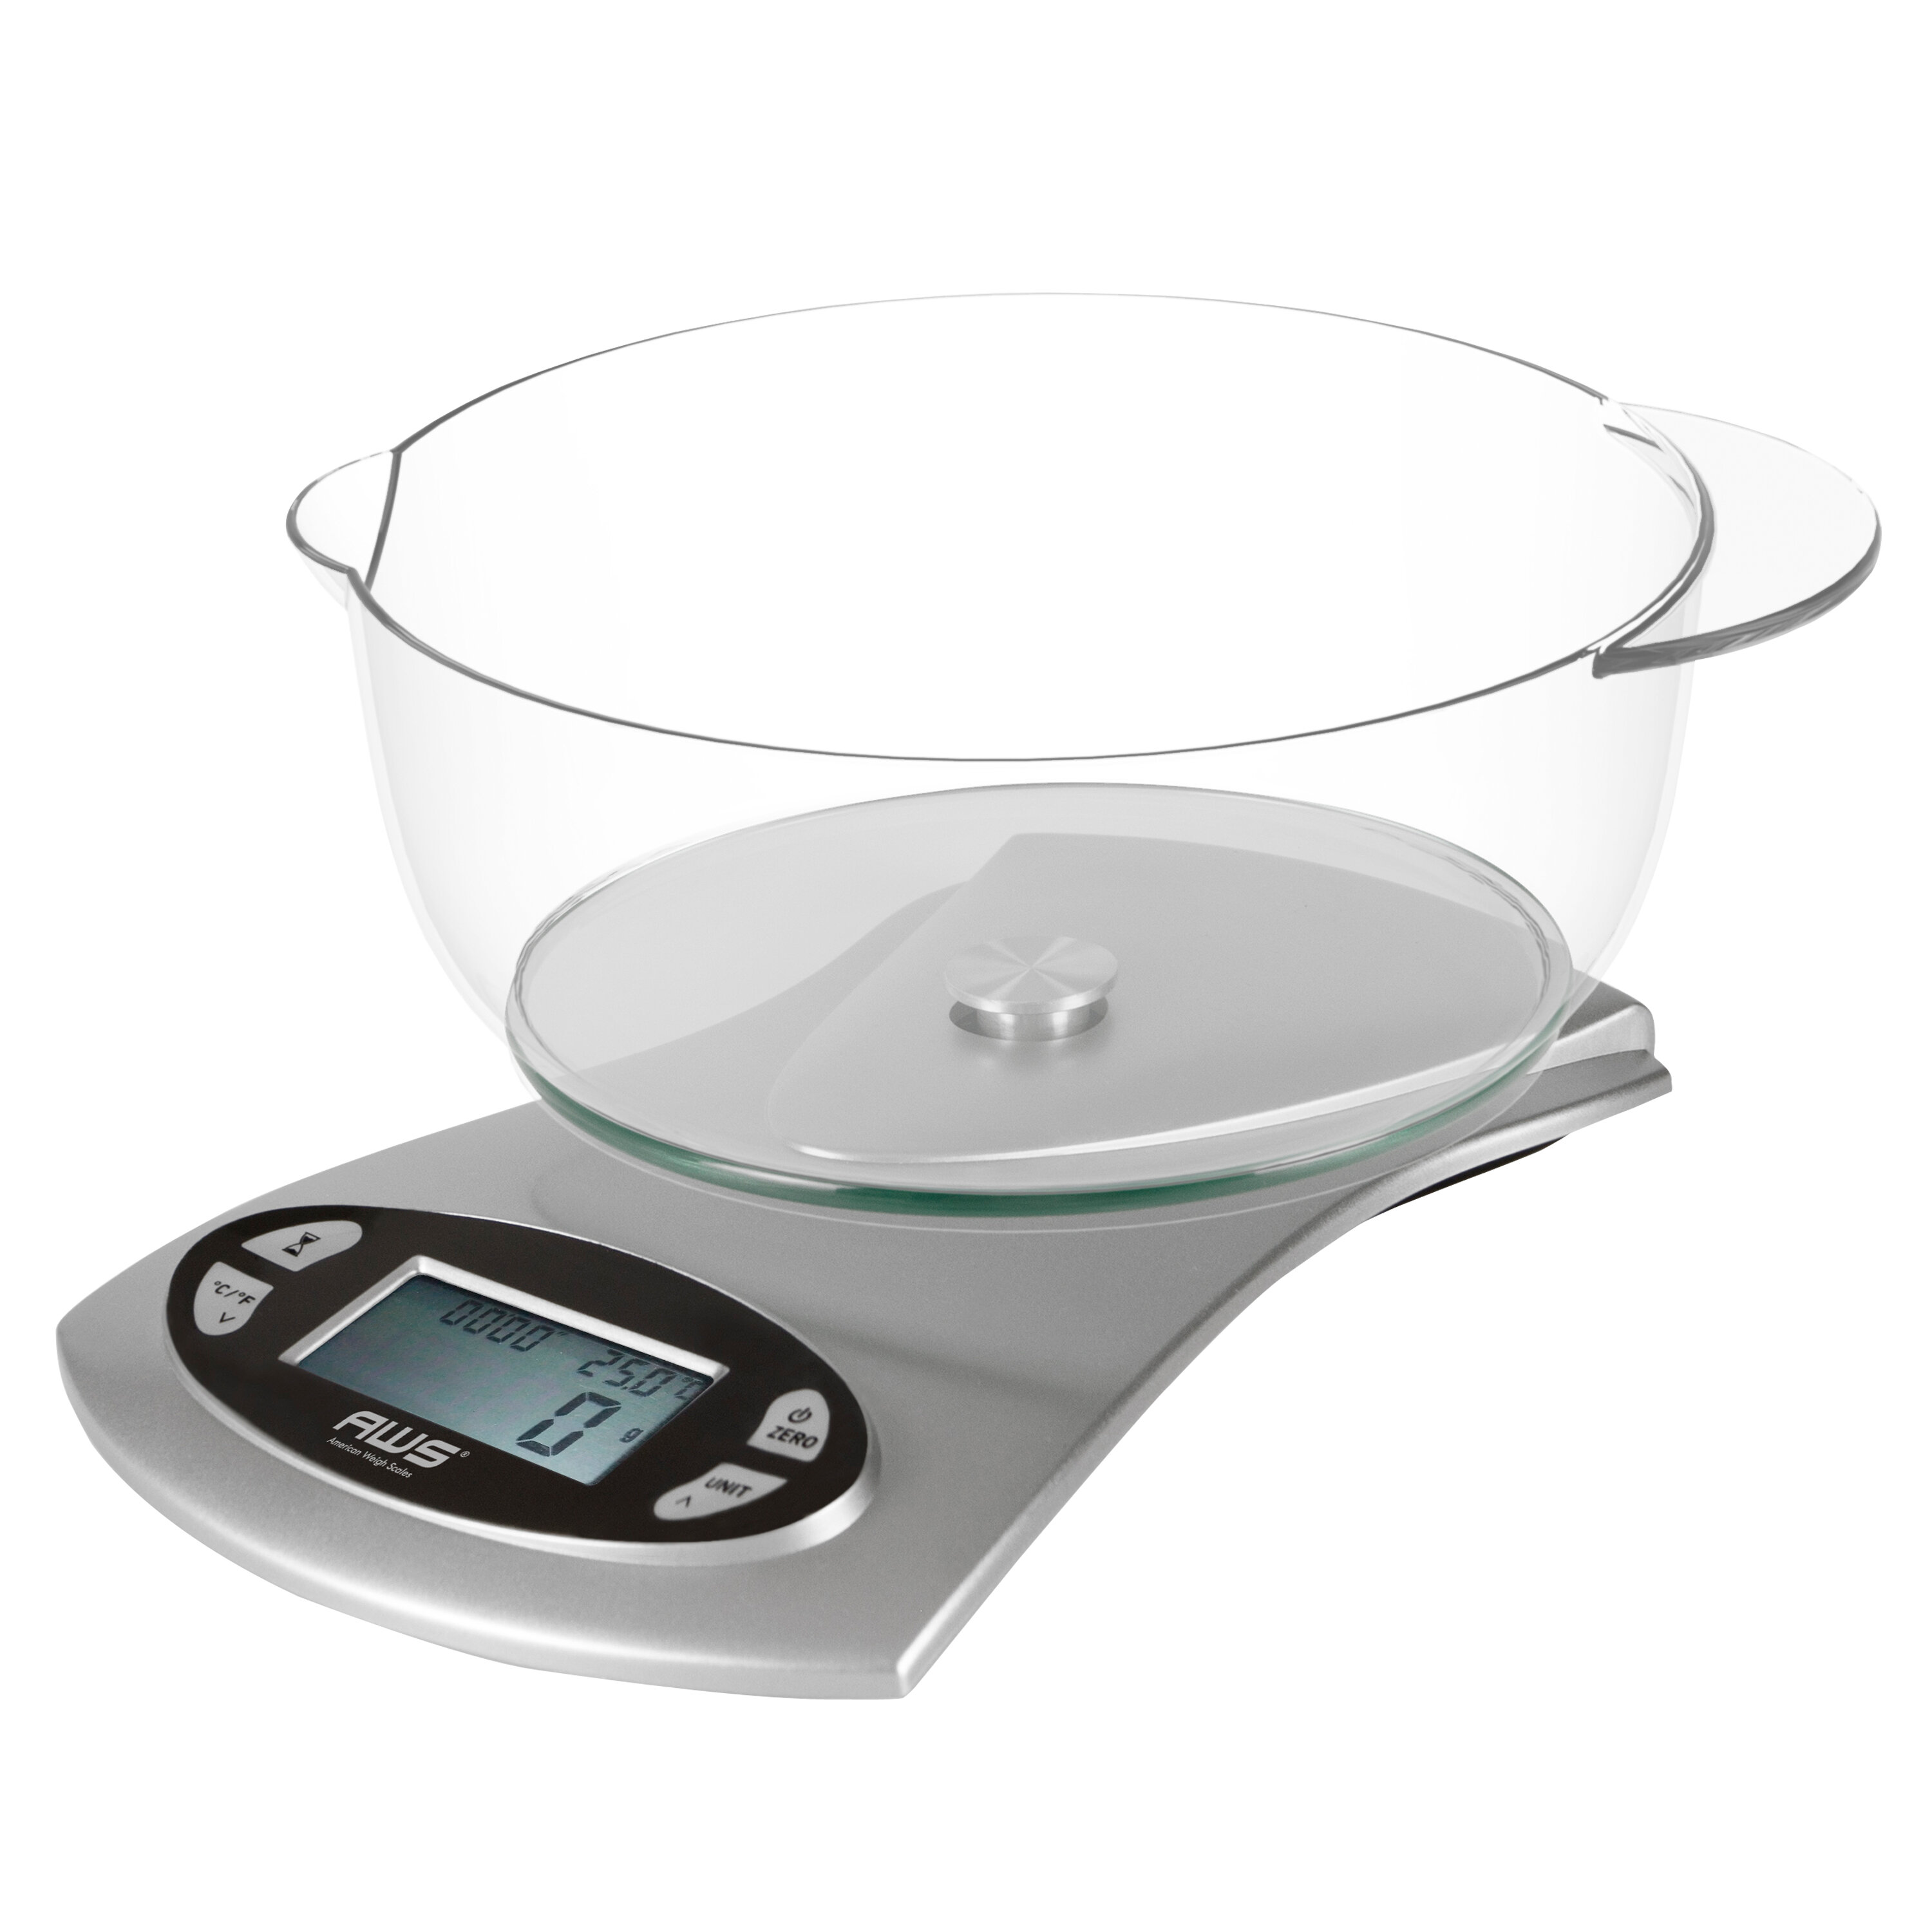 American Weigh Scales Culinarian Digital Kitchen Scale, 22lb